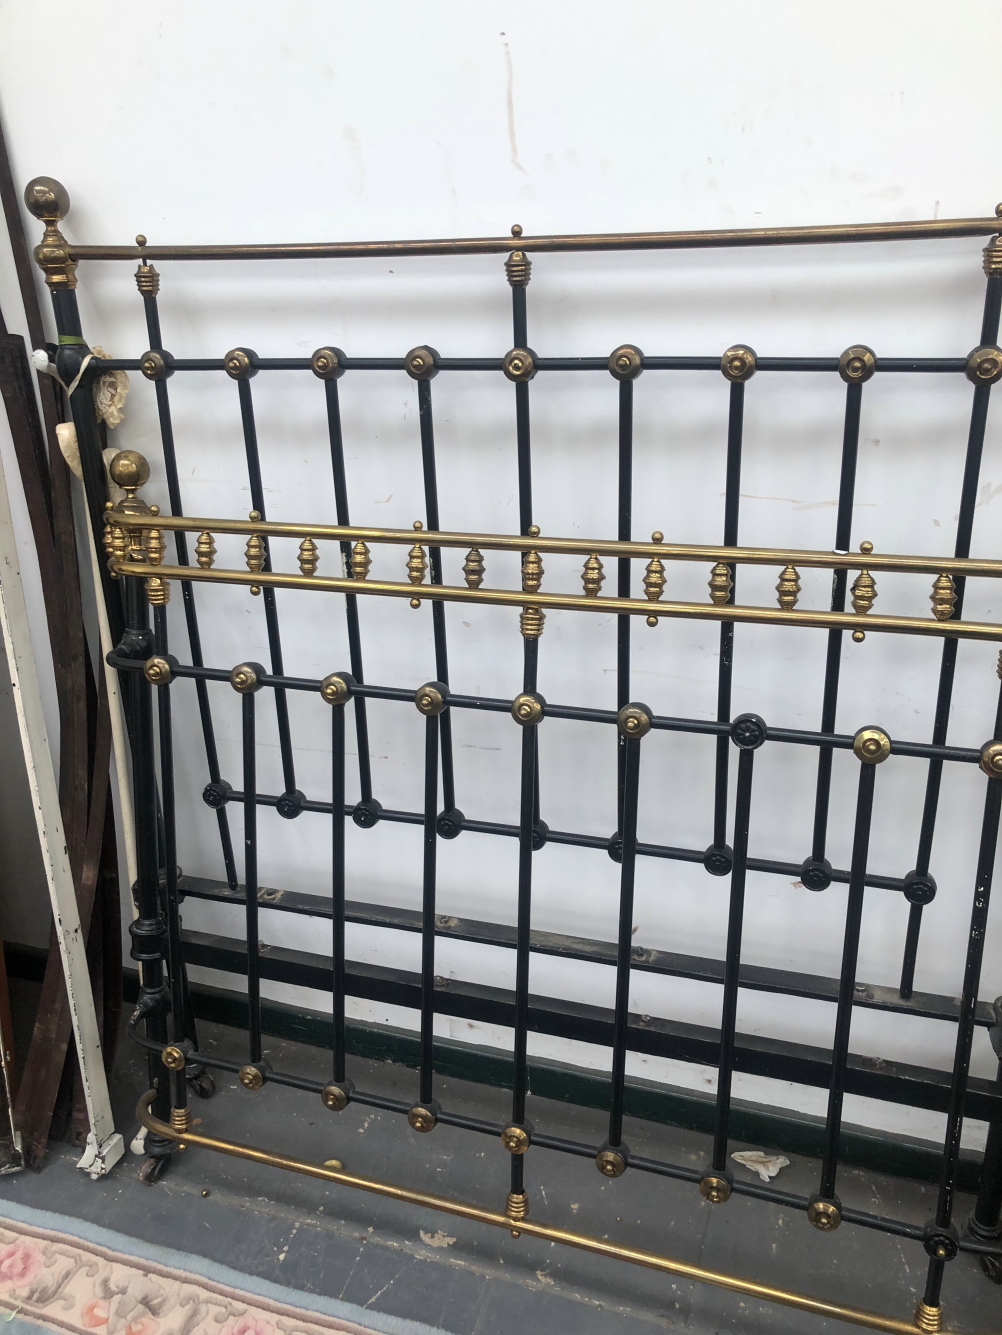 AN EARLY 20th C. BRASS TOPPED IRON DOUBLE BED, TO TAKE A MATTRESS. 182 x 128cms.